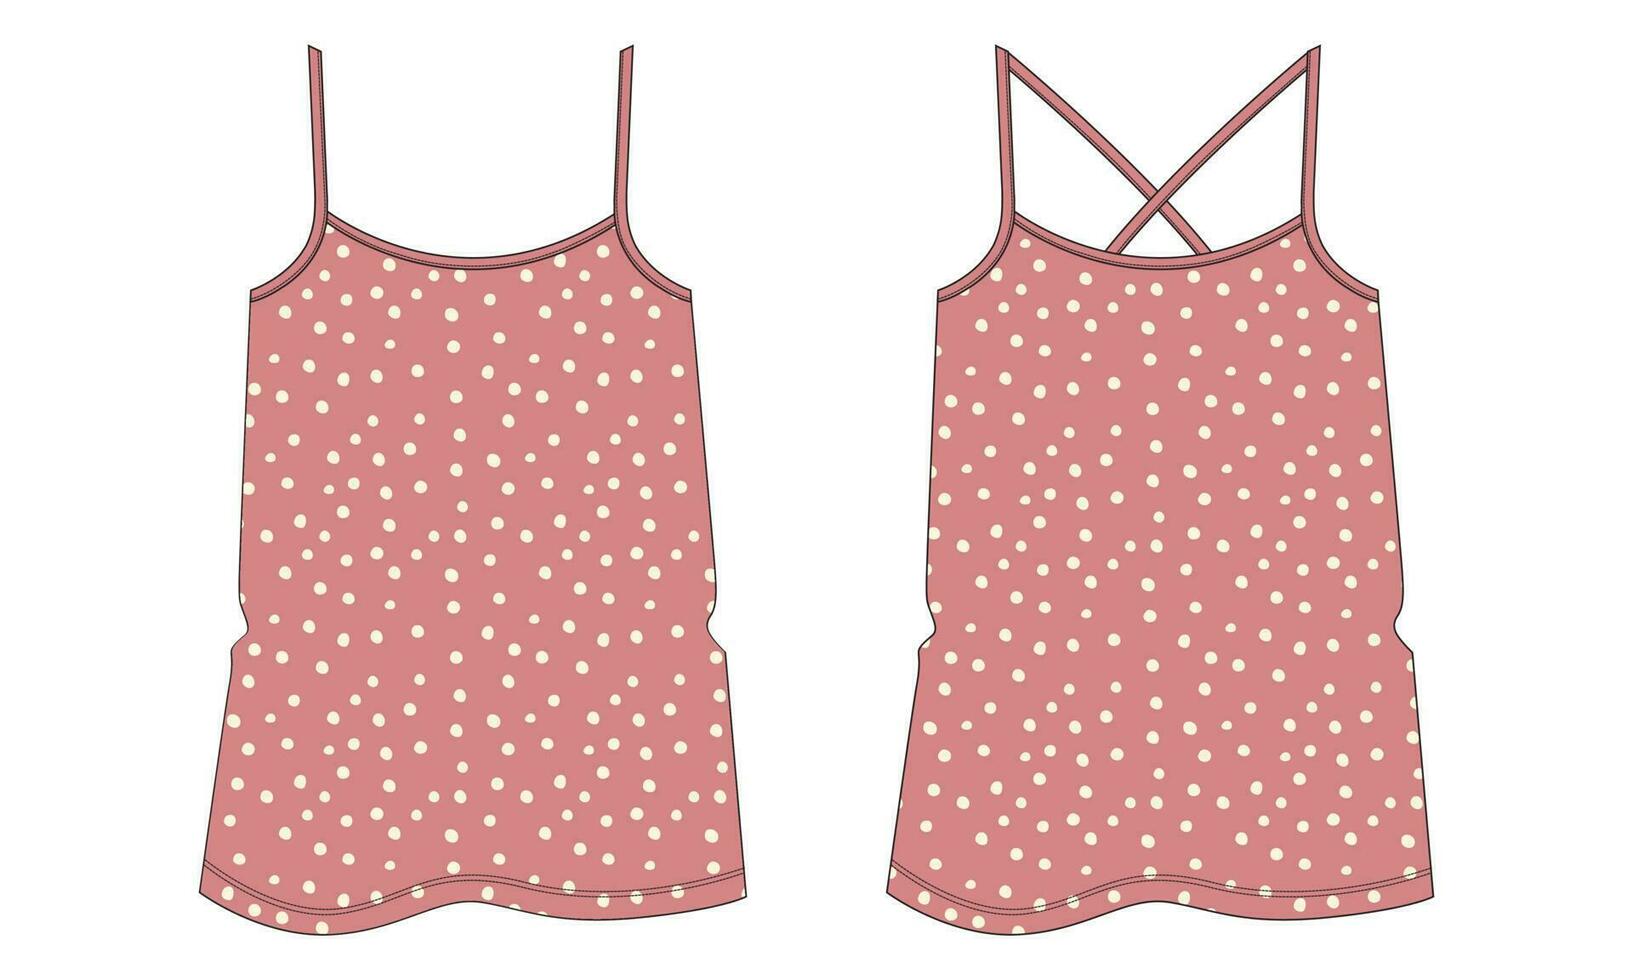 Ladies tank tops with all over print technical drawing fashion flat sketch vector illustration template front and back views